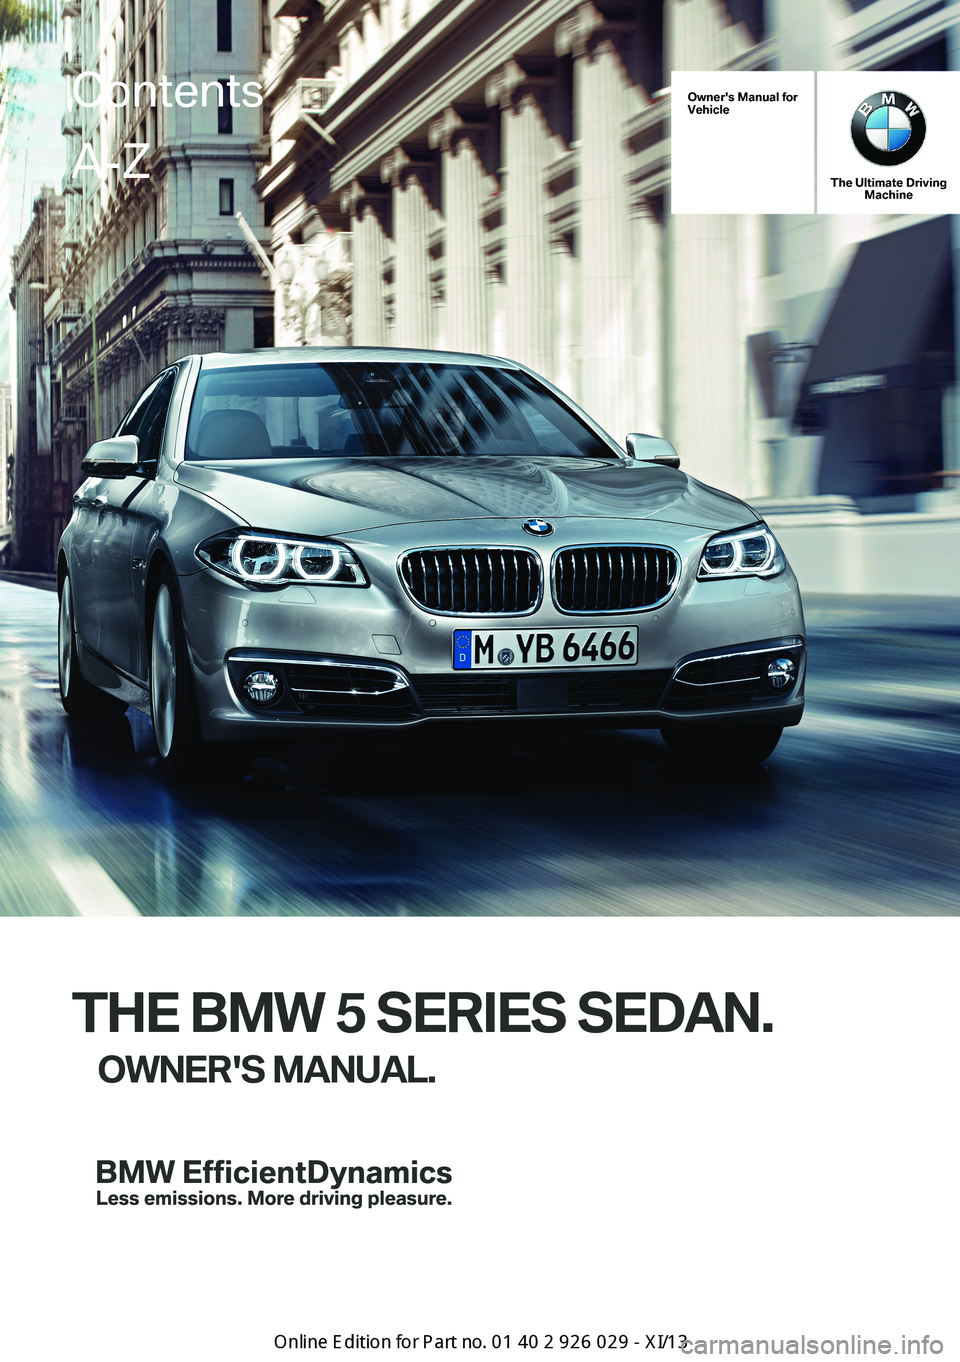 BMW 535I SEDAN 2013  Owners Manual Owner's Manual forVehicle
The Ultimate DrivingMachine
THE BMW 5 SERIES SEDAN.
OWNER'S MANUAL.ContentsA-Z
Online Edition for Part no. 01 40 2 911 177 - VI/13   